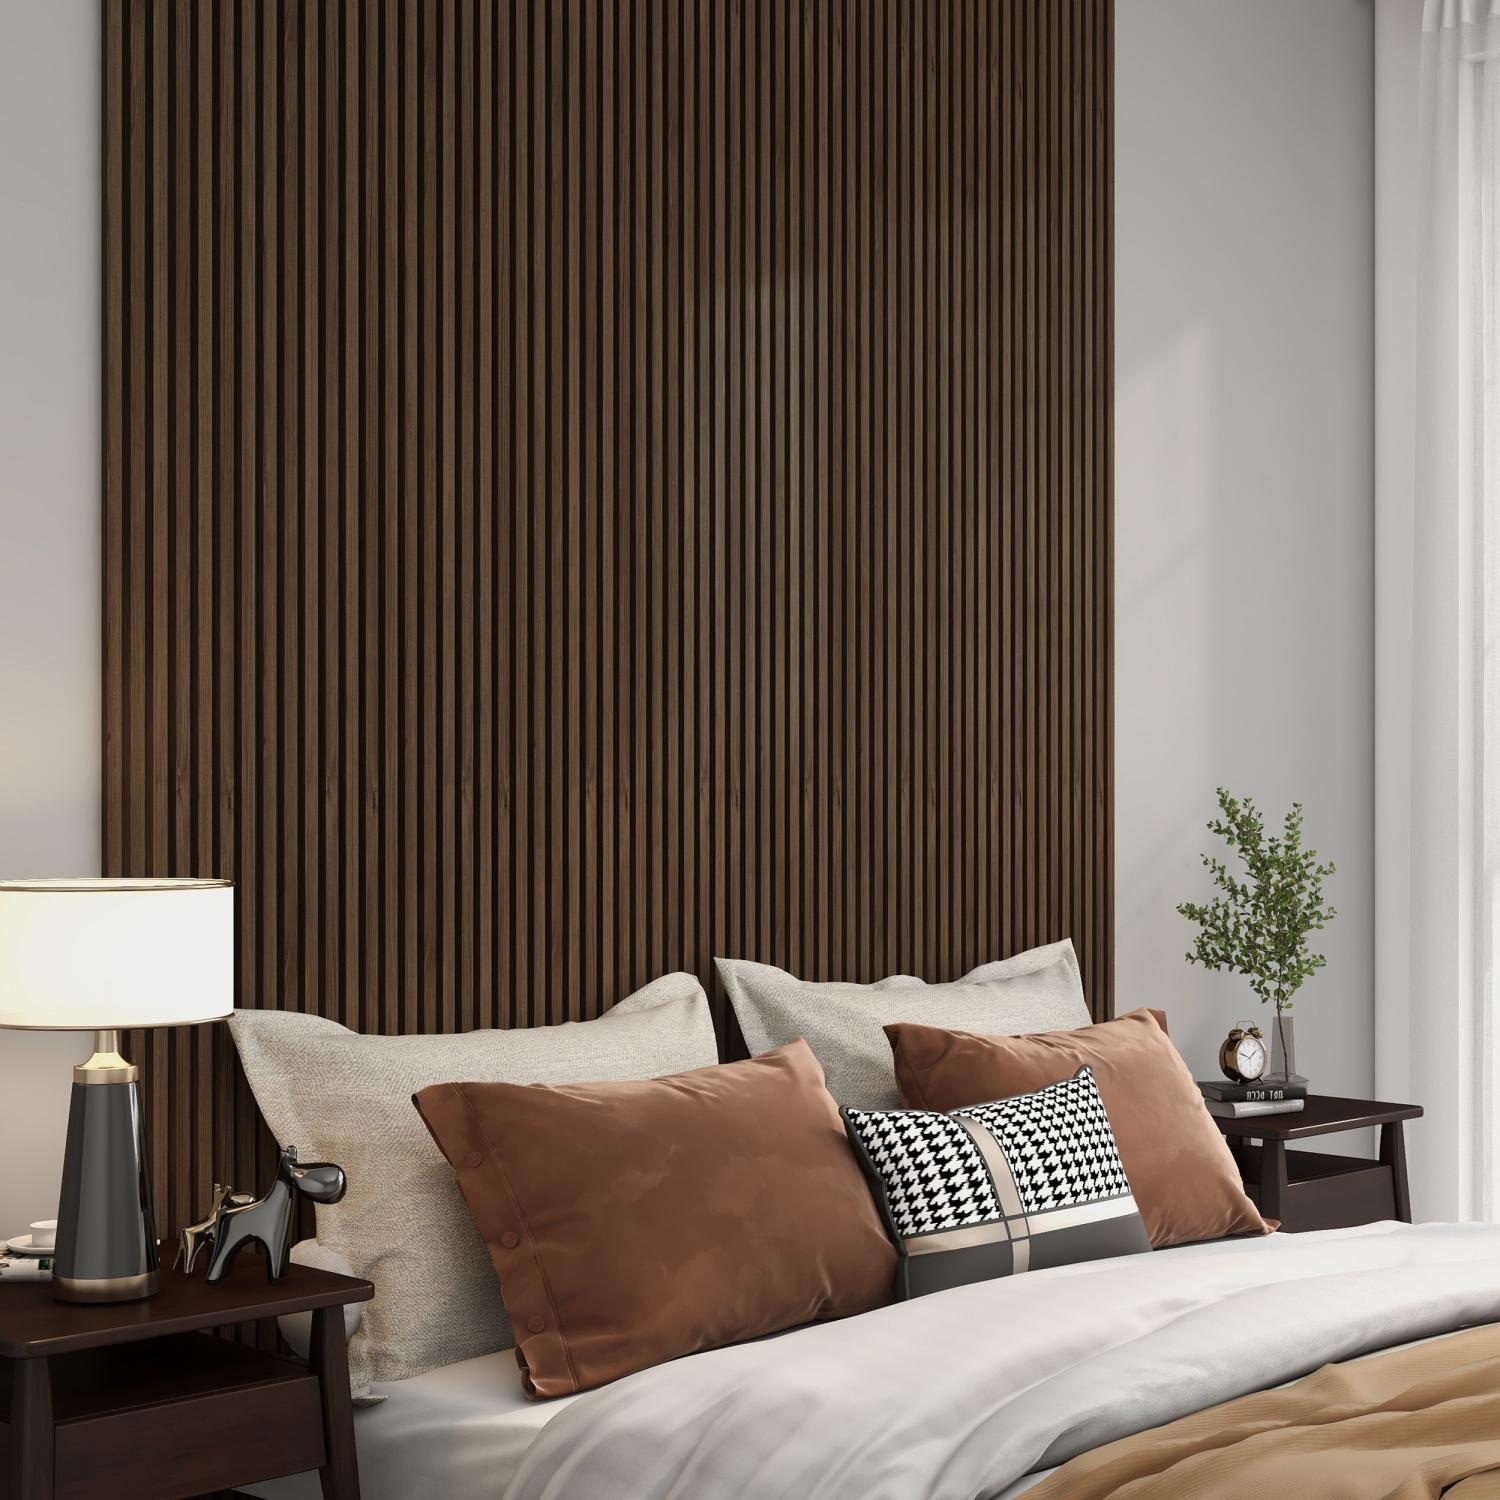 Acoustic Panel / Wall Panel in Smoked Oak, 240 x 60 cm